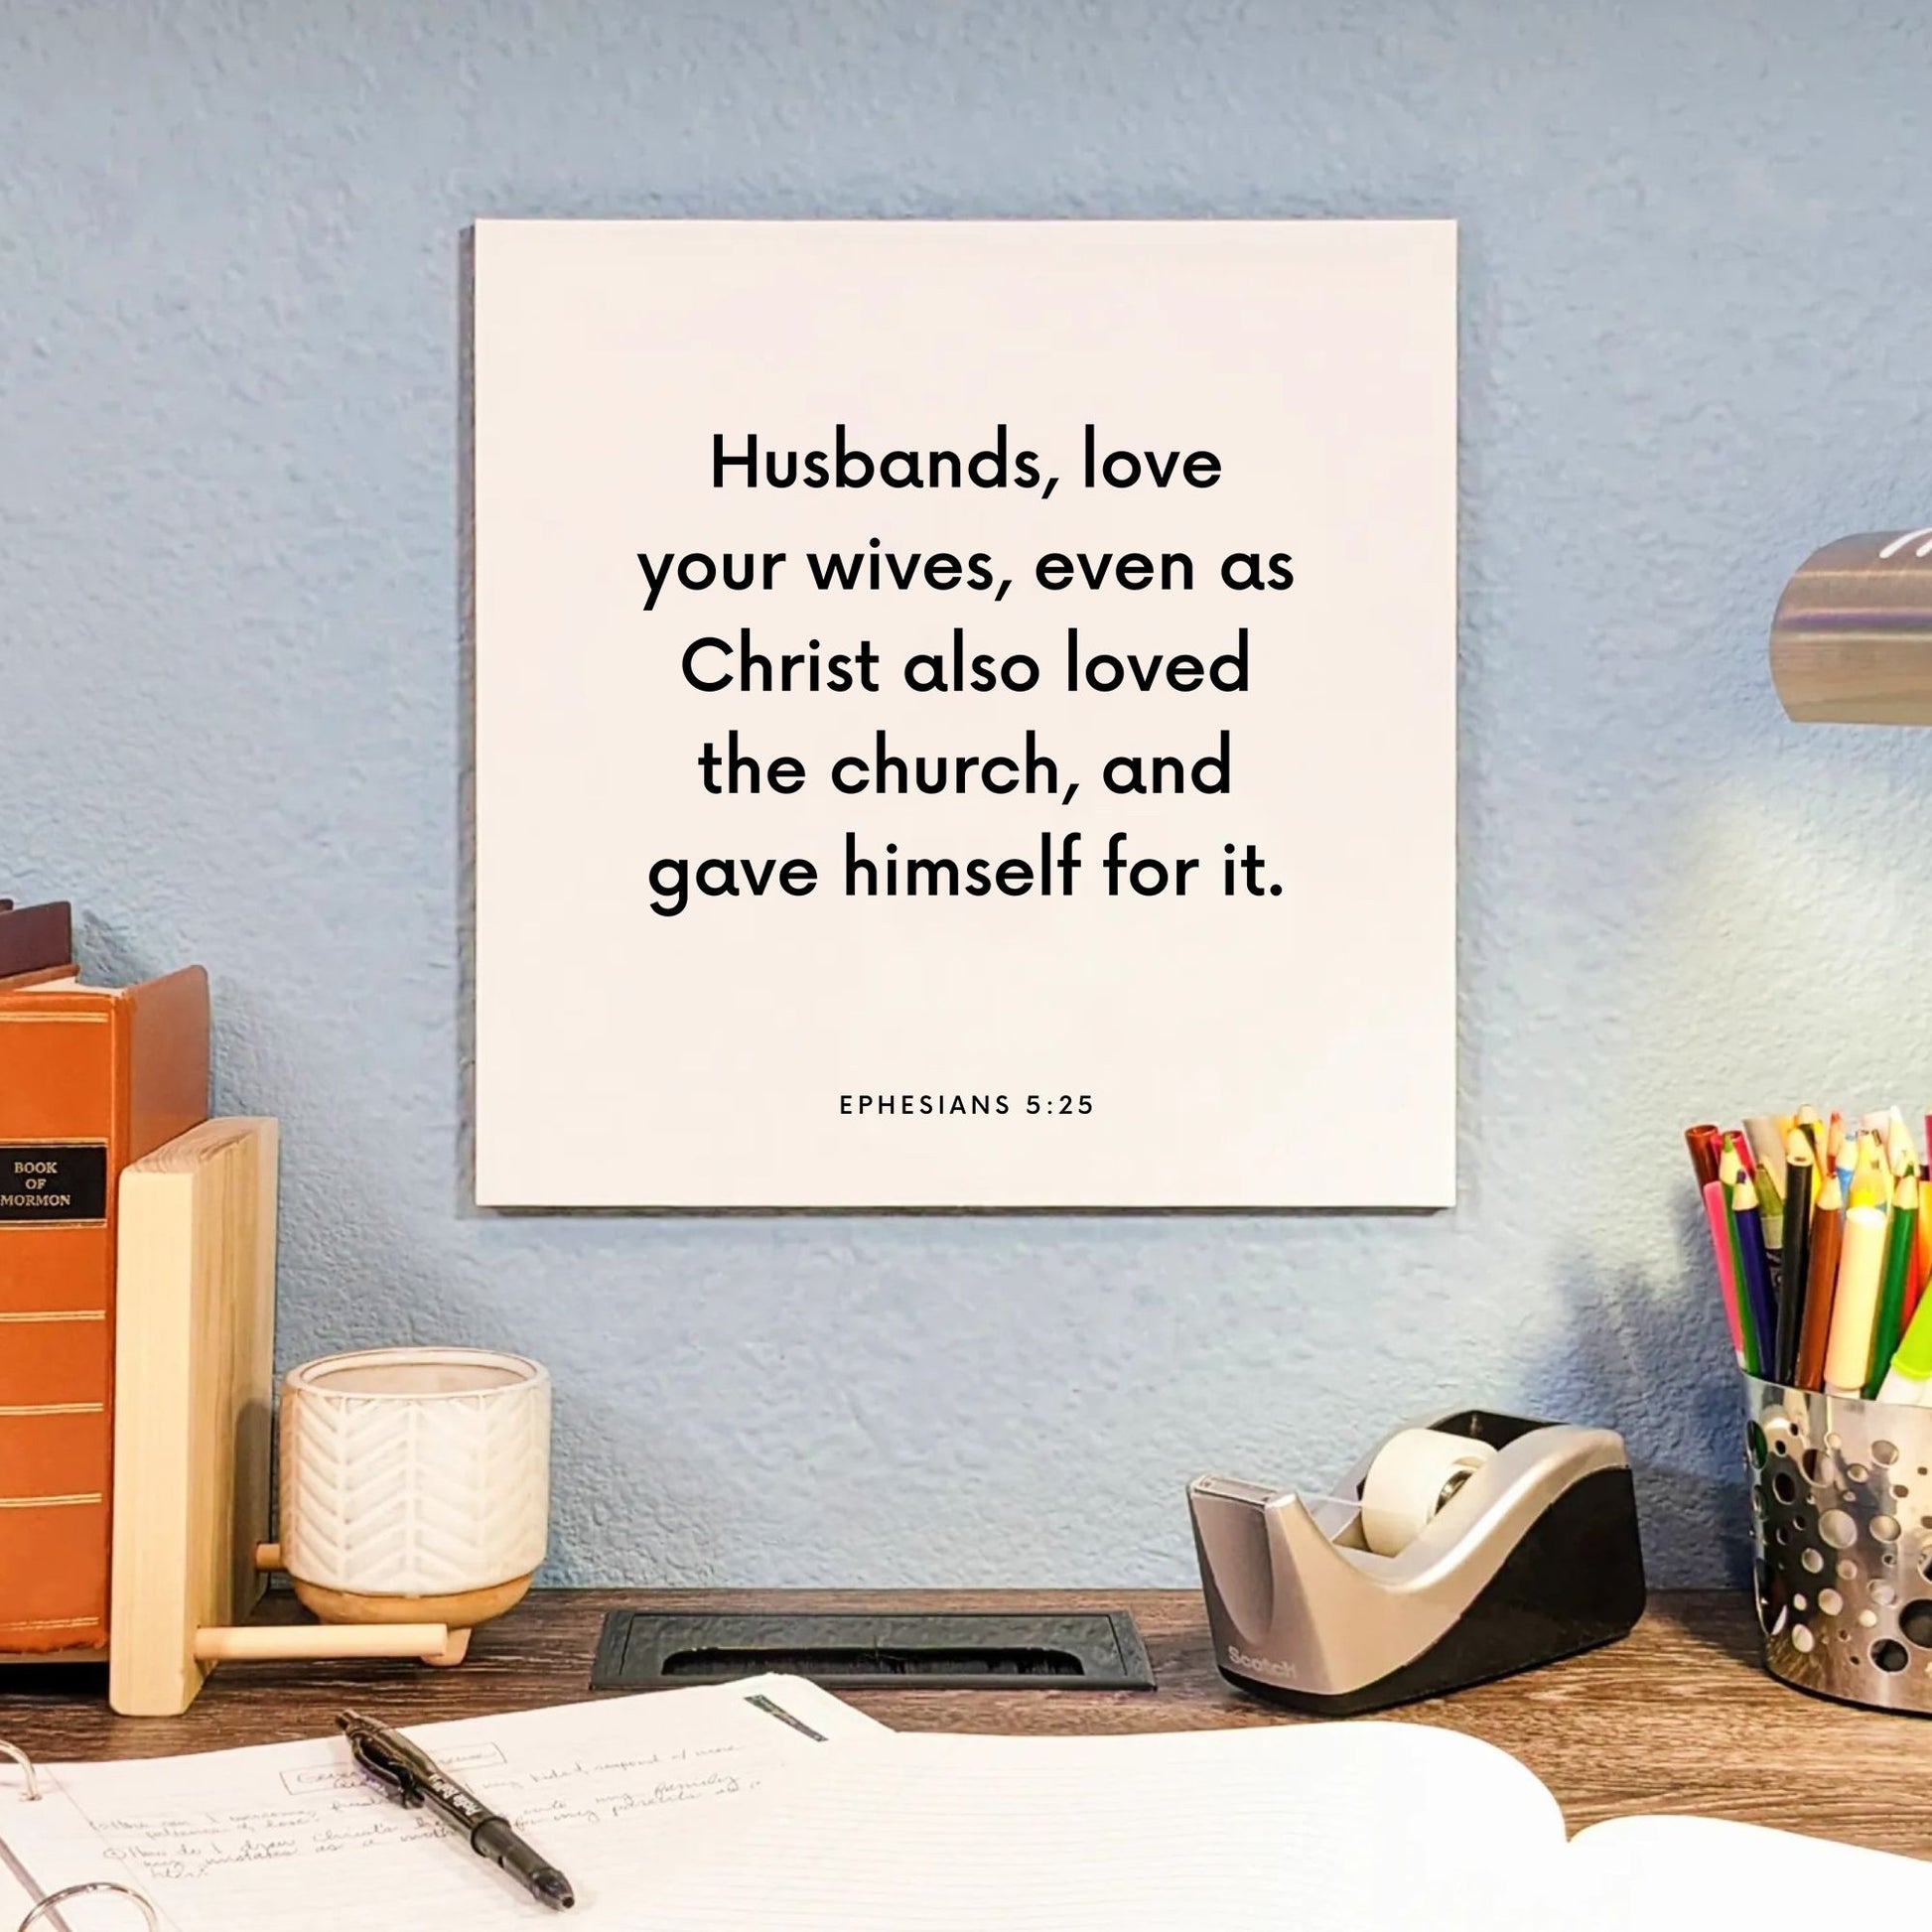 Desk mouting of the scripture tile for Ephesians 5:25 - "Husbands, love your wives, even as Christ loved the church"